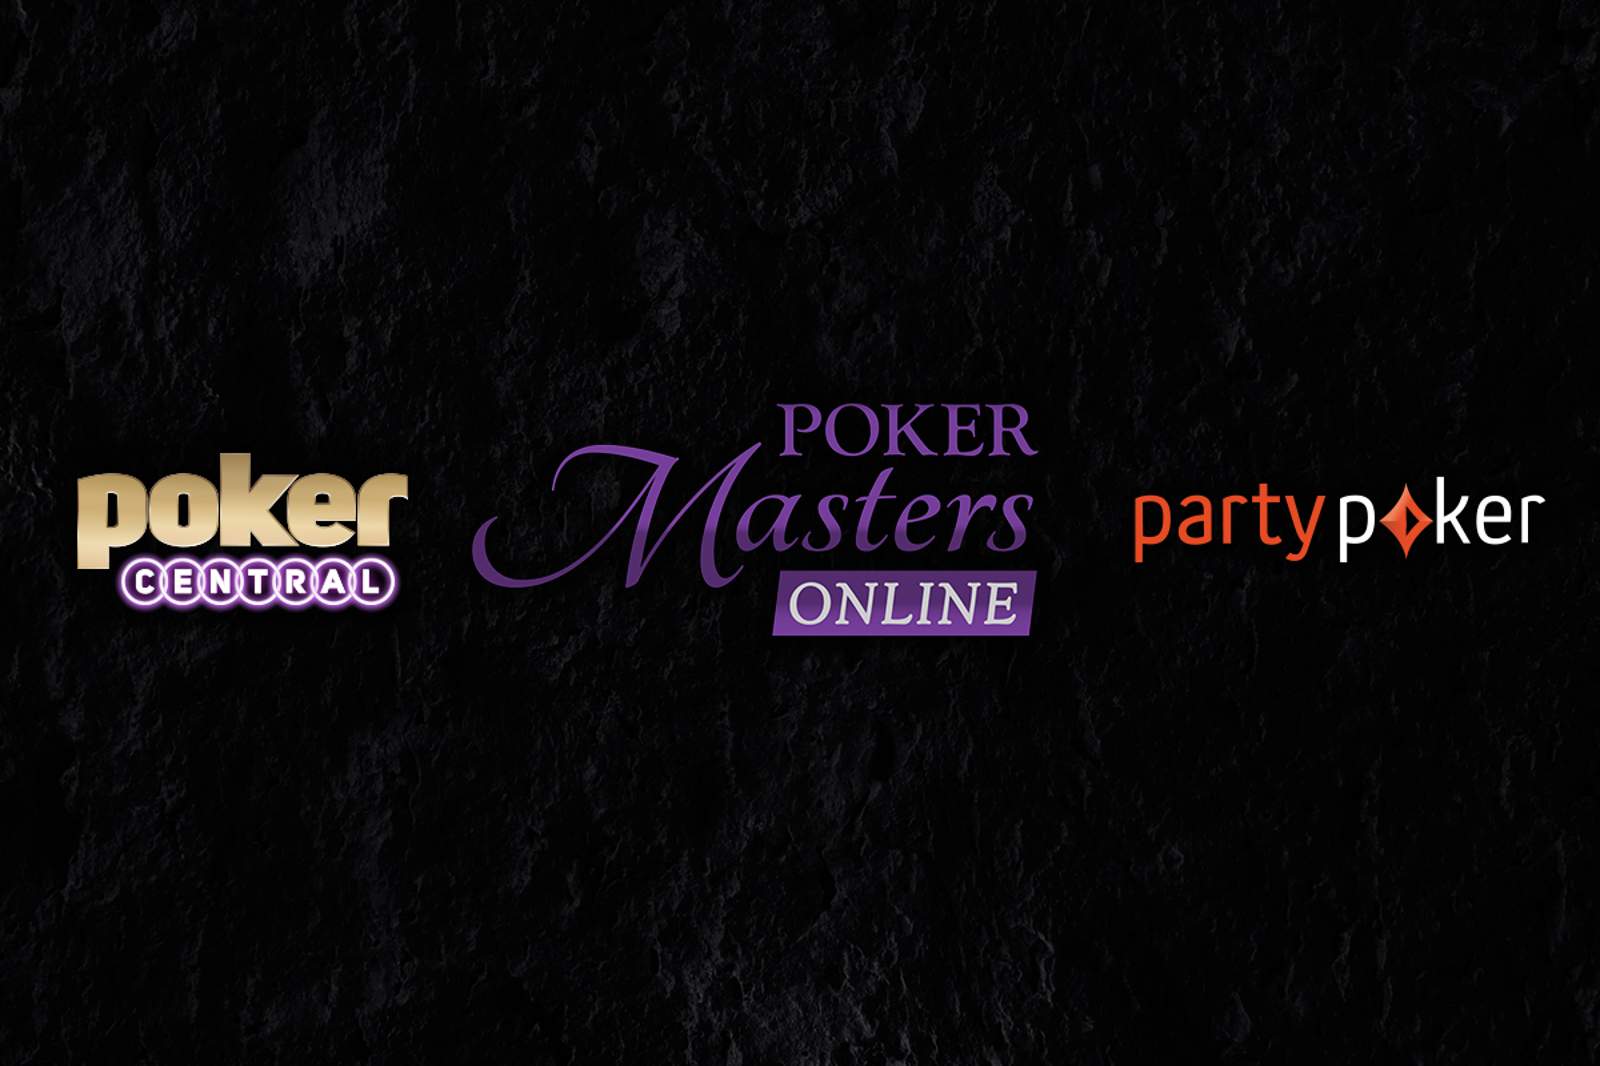 The Poker Masters Online on partypoker Starts This Sunday!